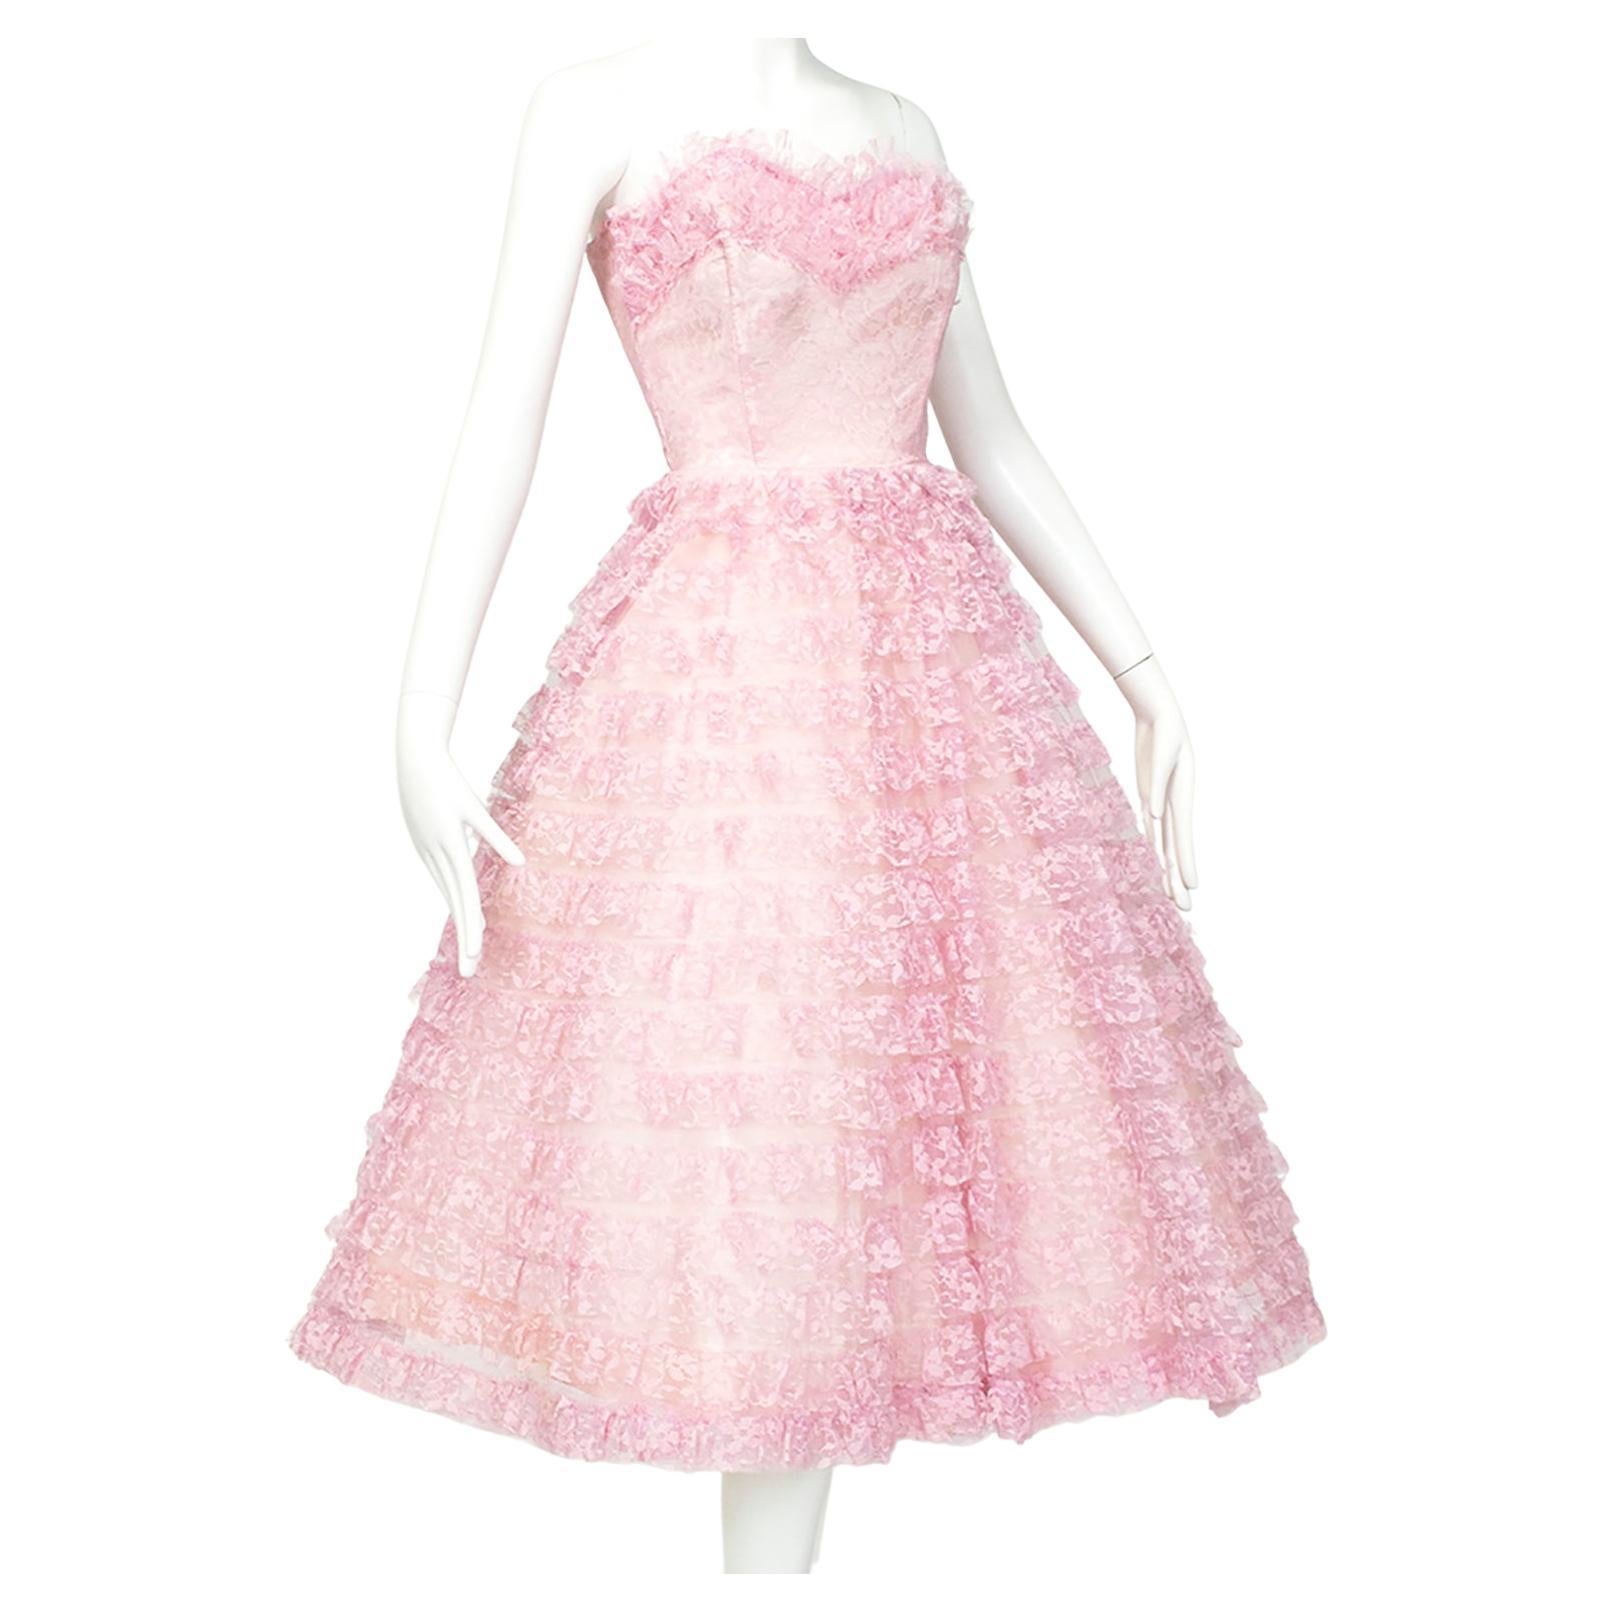 Pink-Lavender New Look Strapless Tiered Lace Ballerina Party Dress – S-M, 1950s For Sale